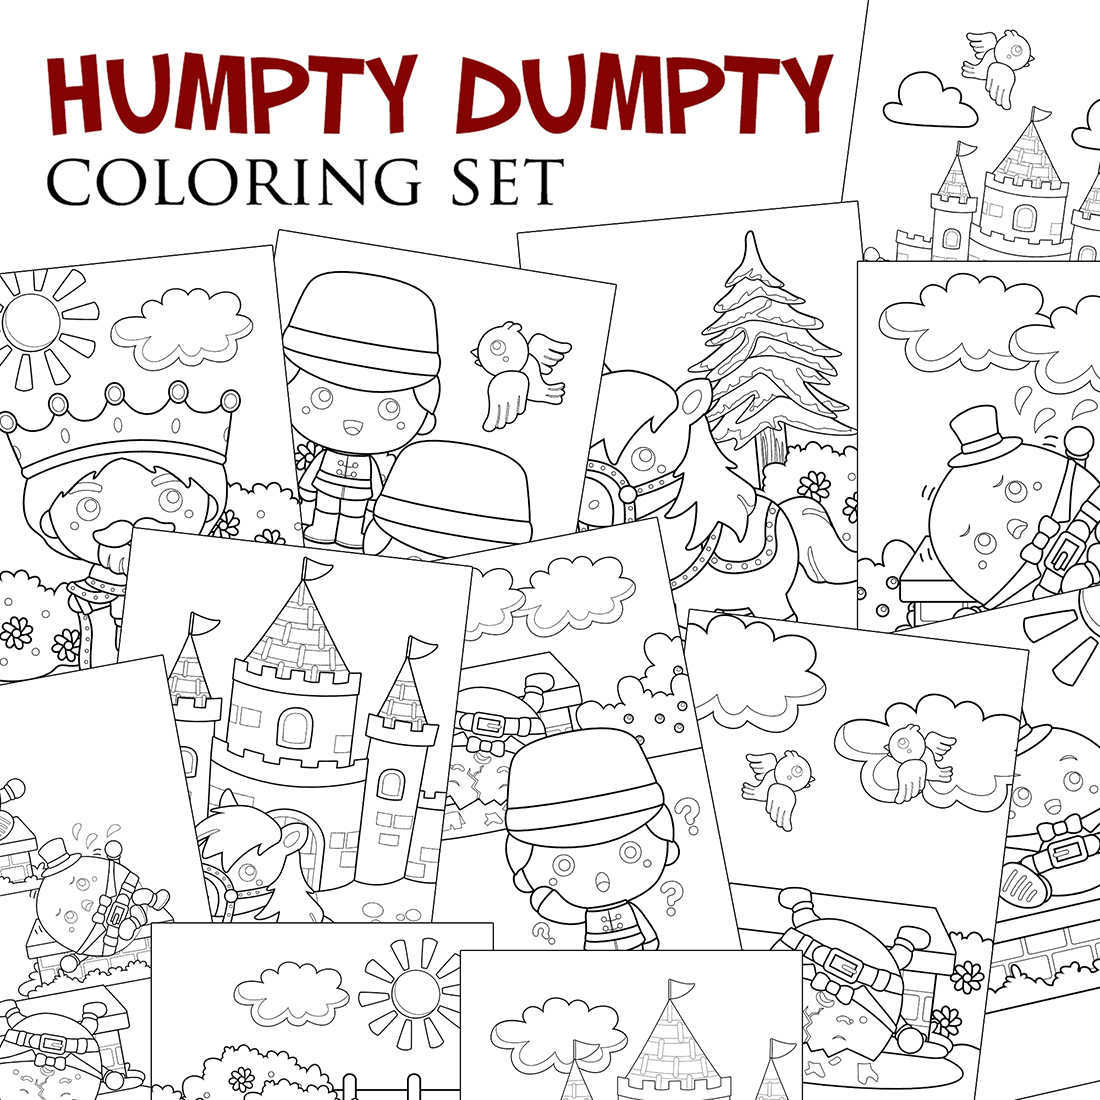 Humpty dumpty classic song rhymes story coloring pages activity for kids and adult